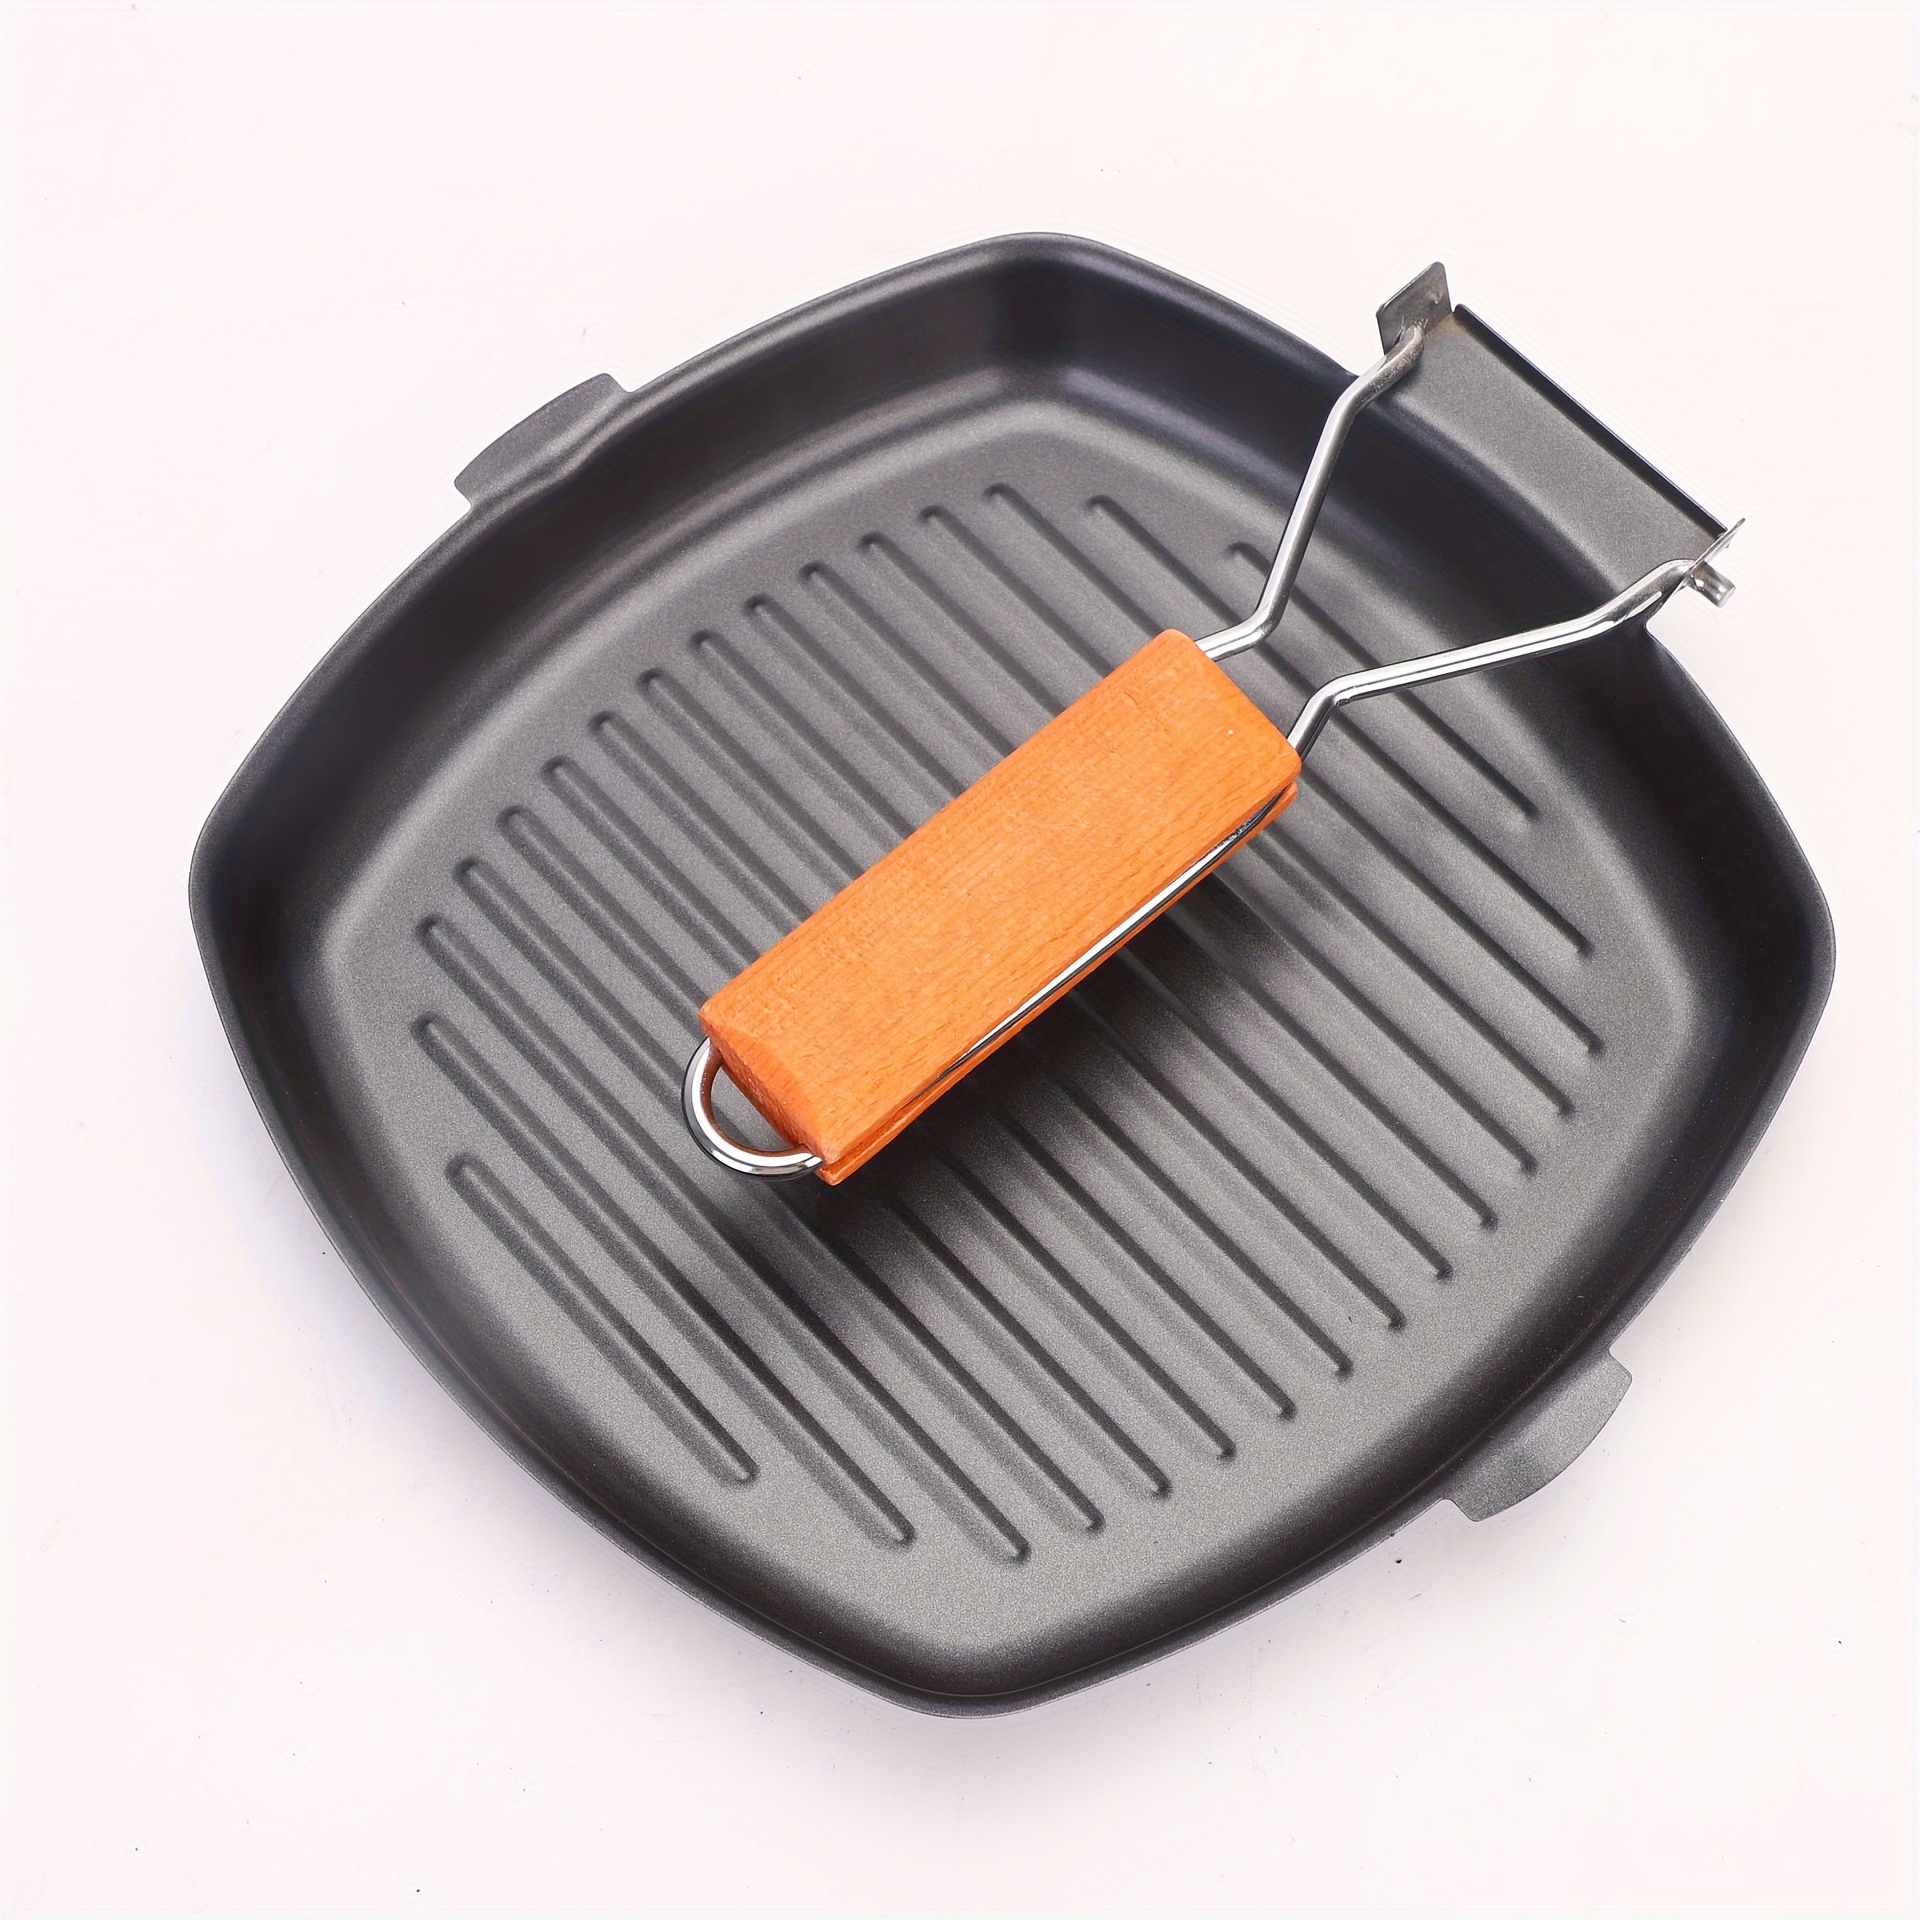 Reversible Cast Iron Grill Griddle Pan Ribbed/Flat Hamburger Steak Stove Top  Fry